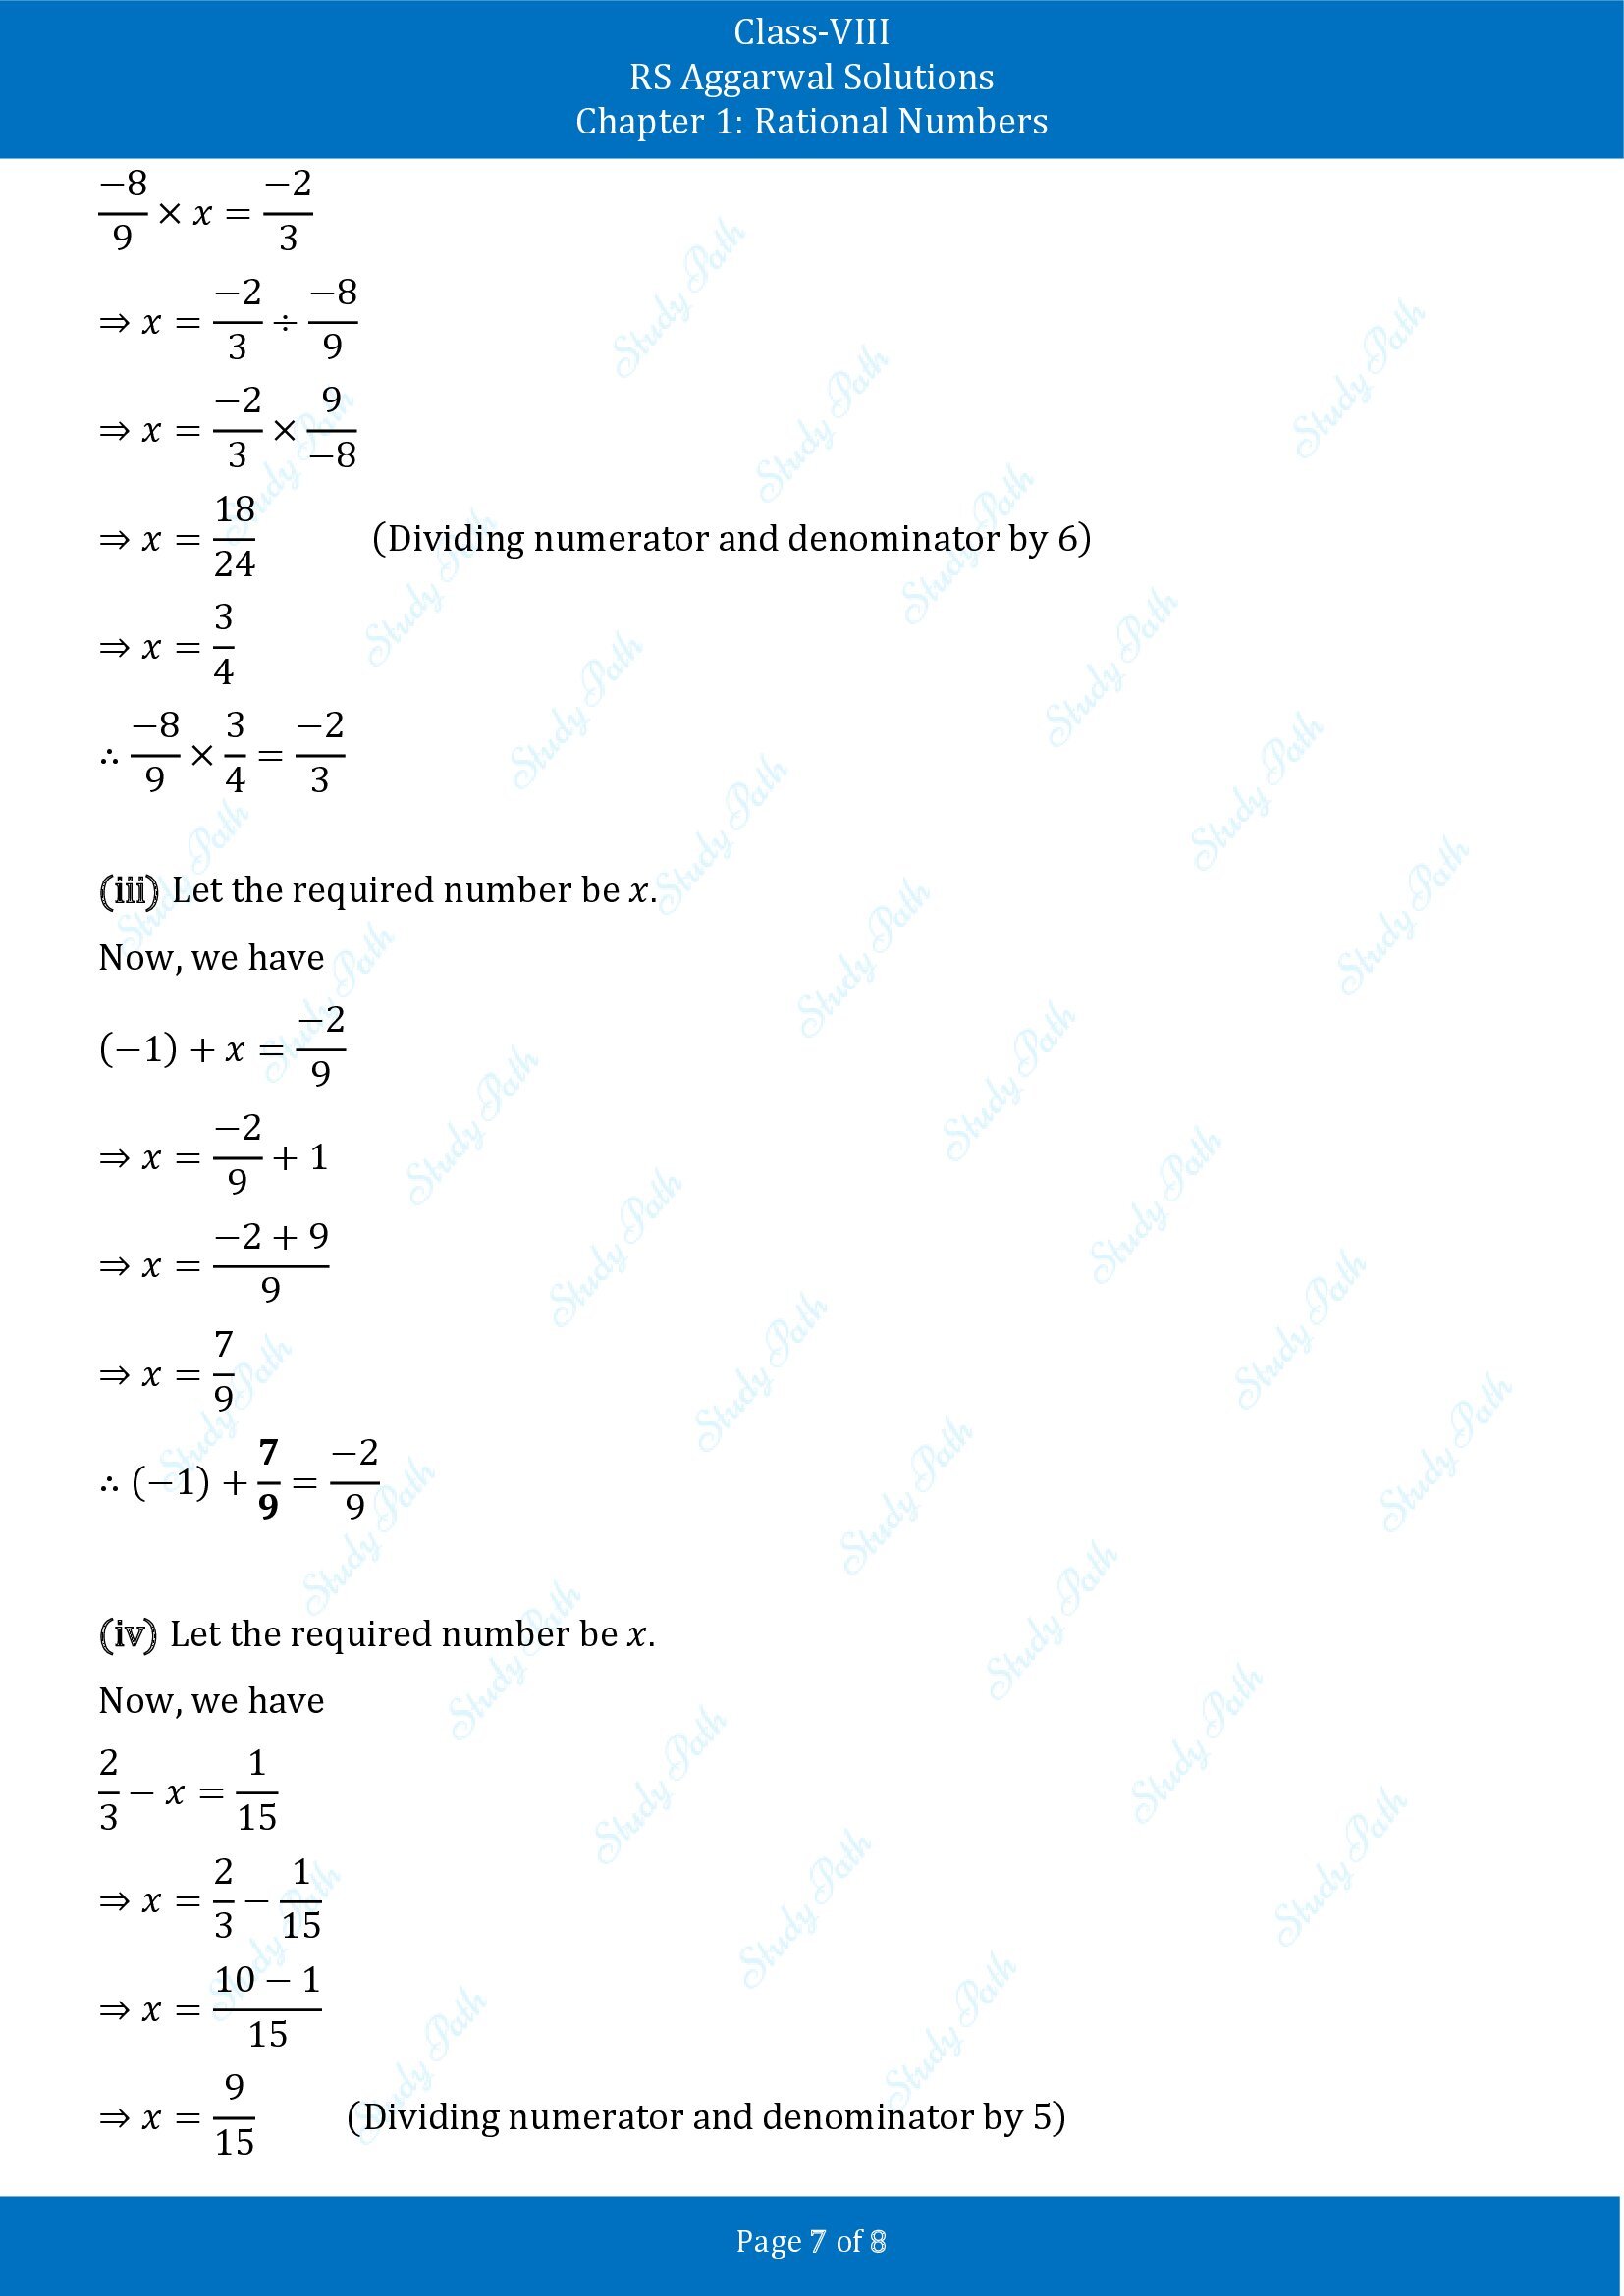 RS Aggarwal Solutions Class 8 Chapter 1 Rational Numbers Test Paper 00007